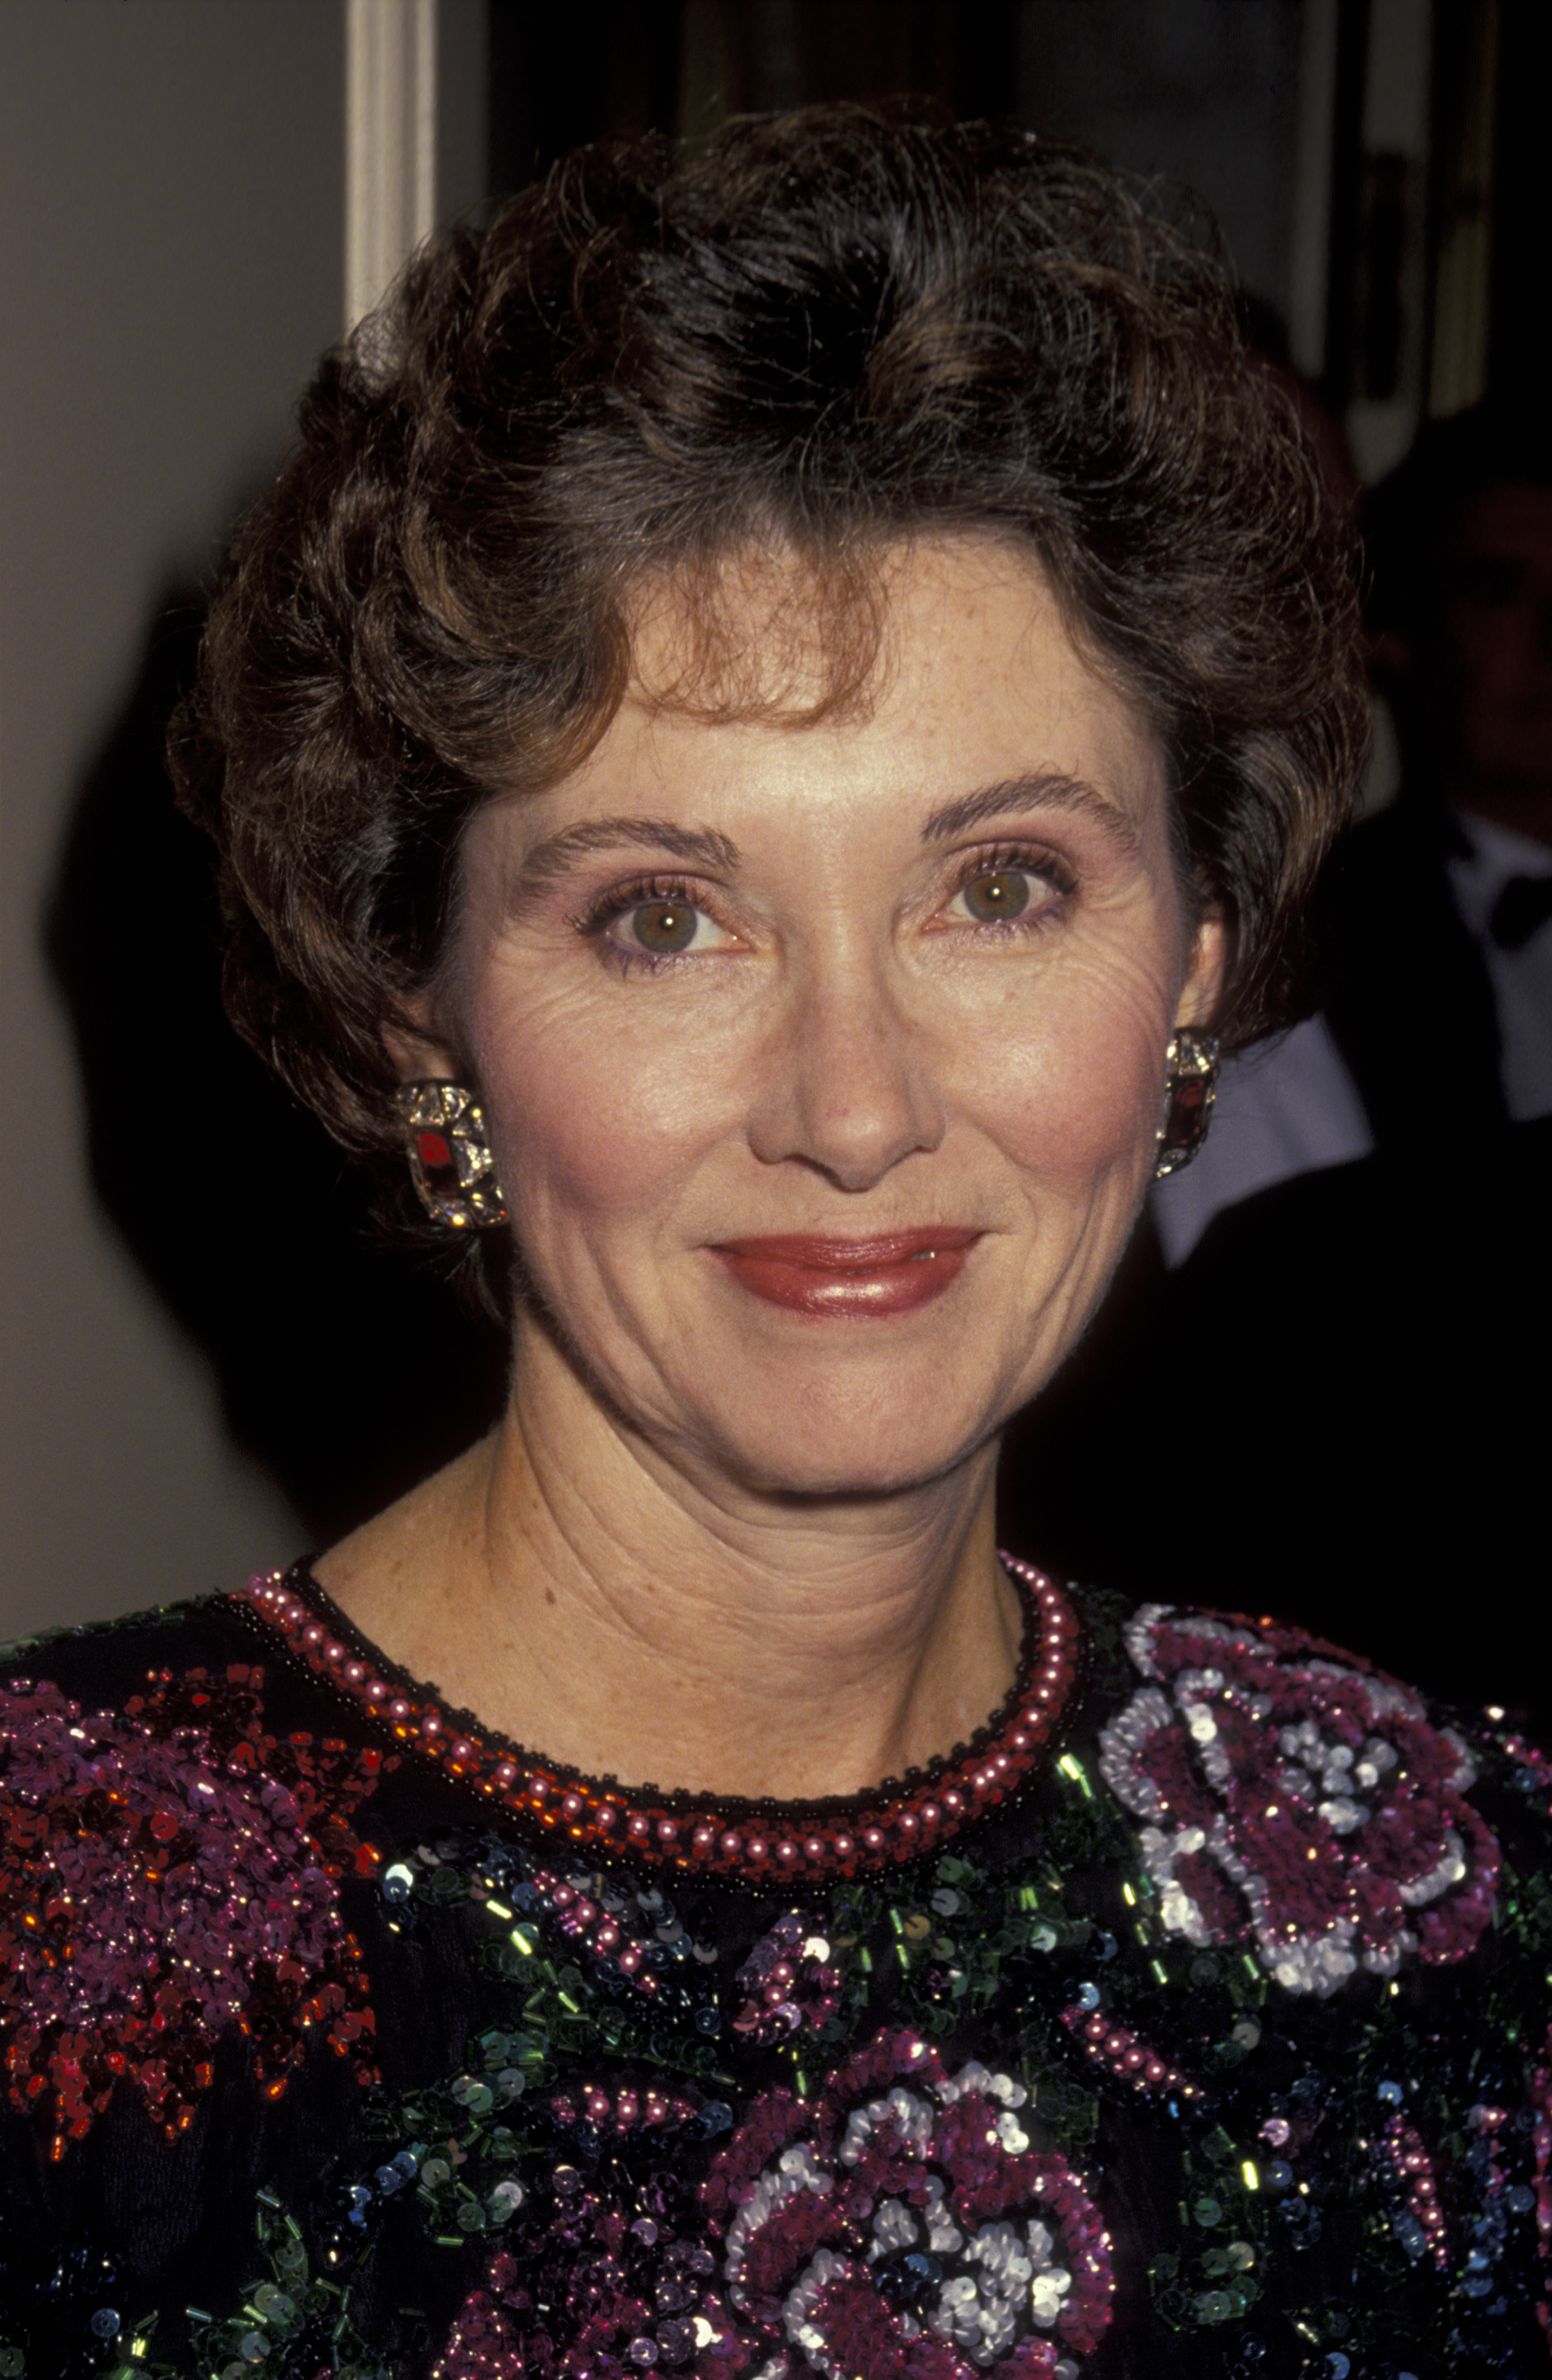 Elinor Donahue at the Spirit of America Benefit Gala in 1990 in California | Source: Getty Images